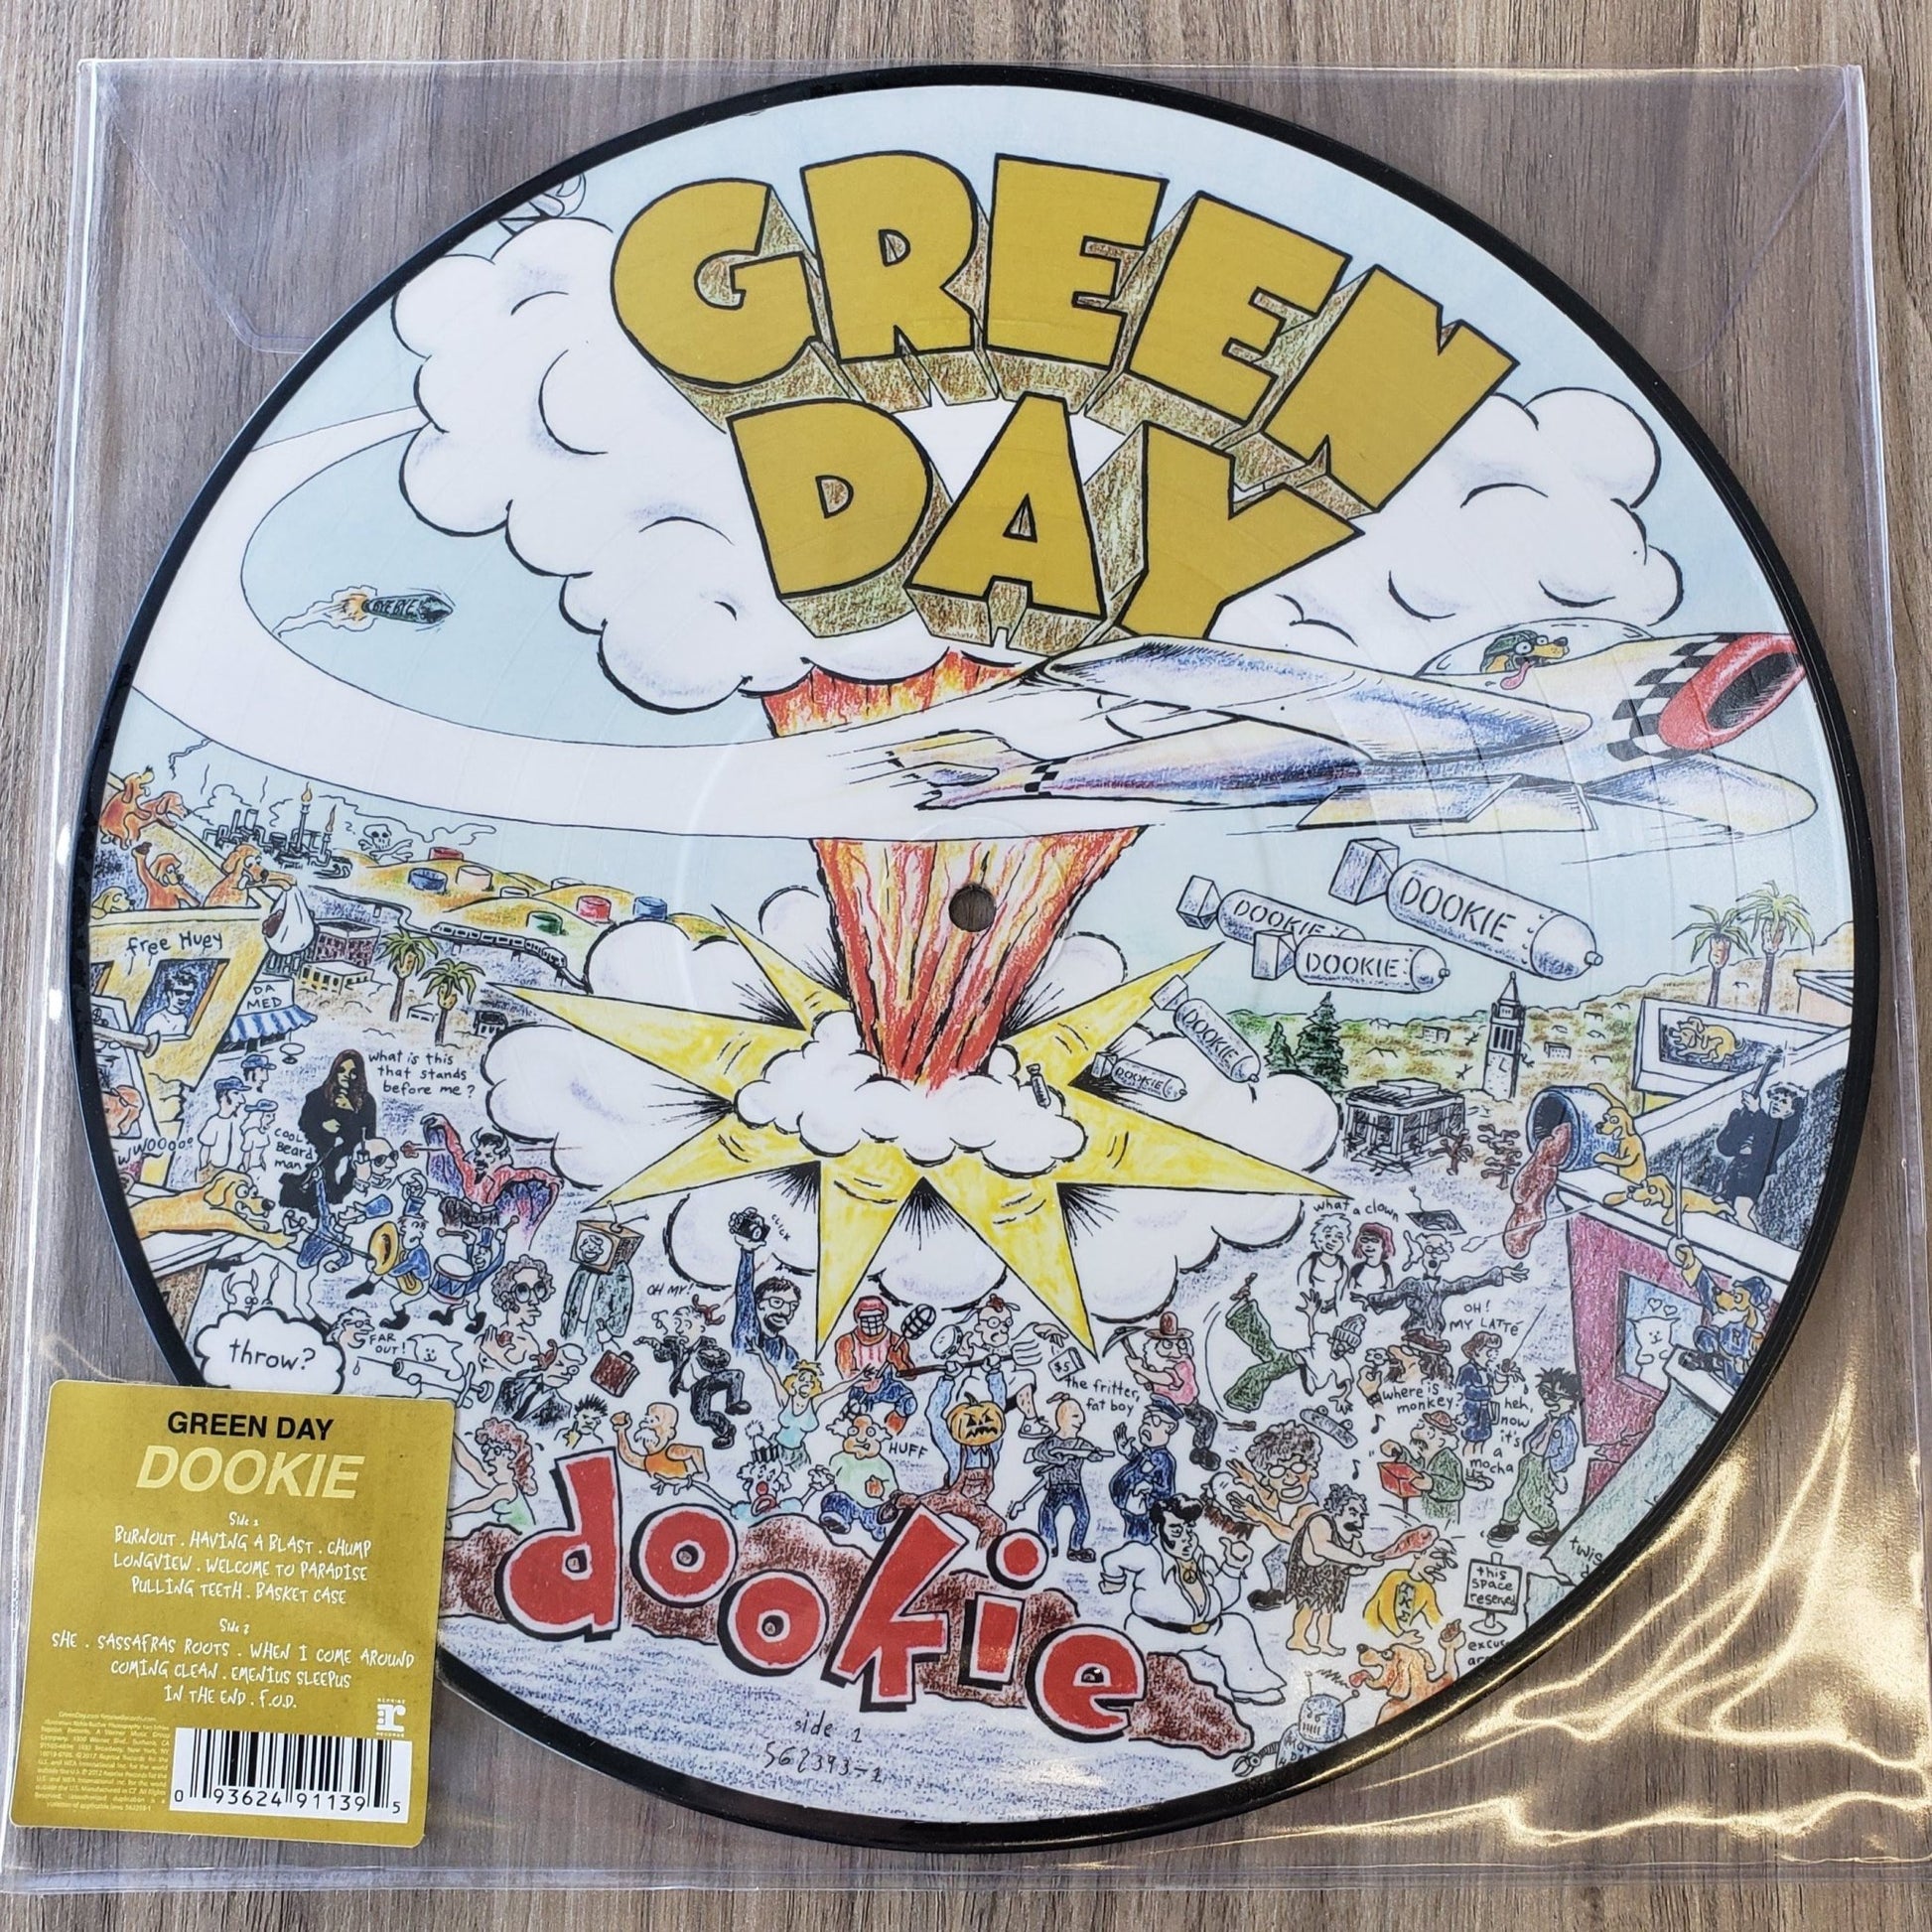 Green Day - Dookie (Picture Disc) - 093624911395 - LP's - Yellow Racket Records